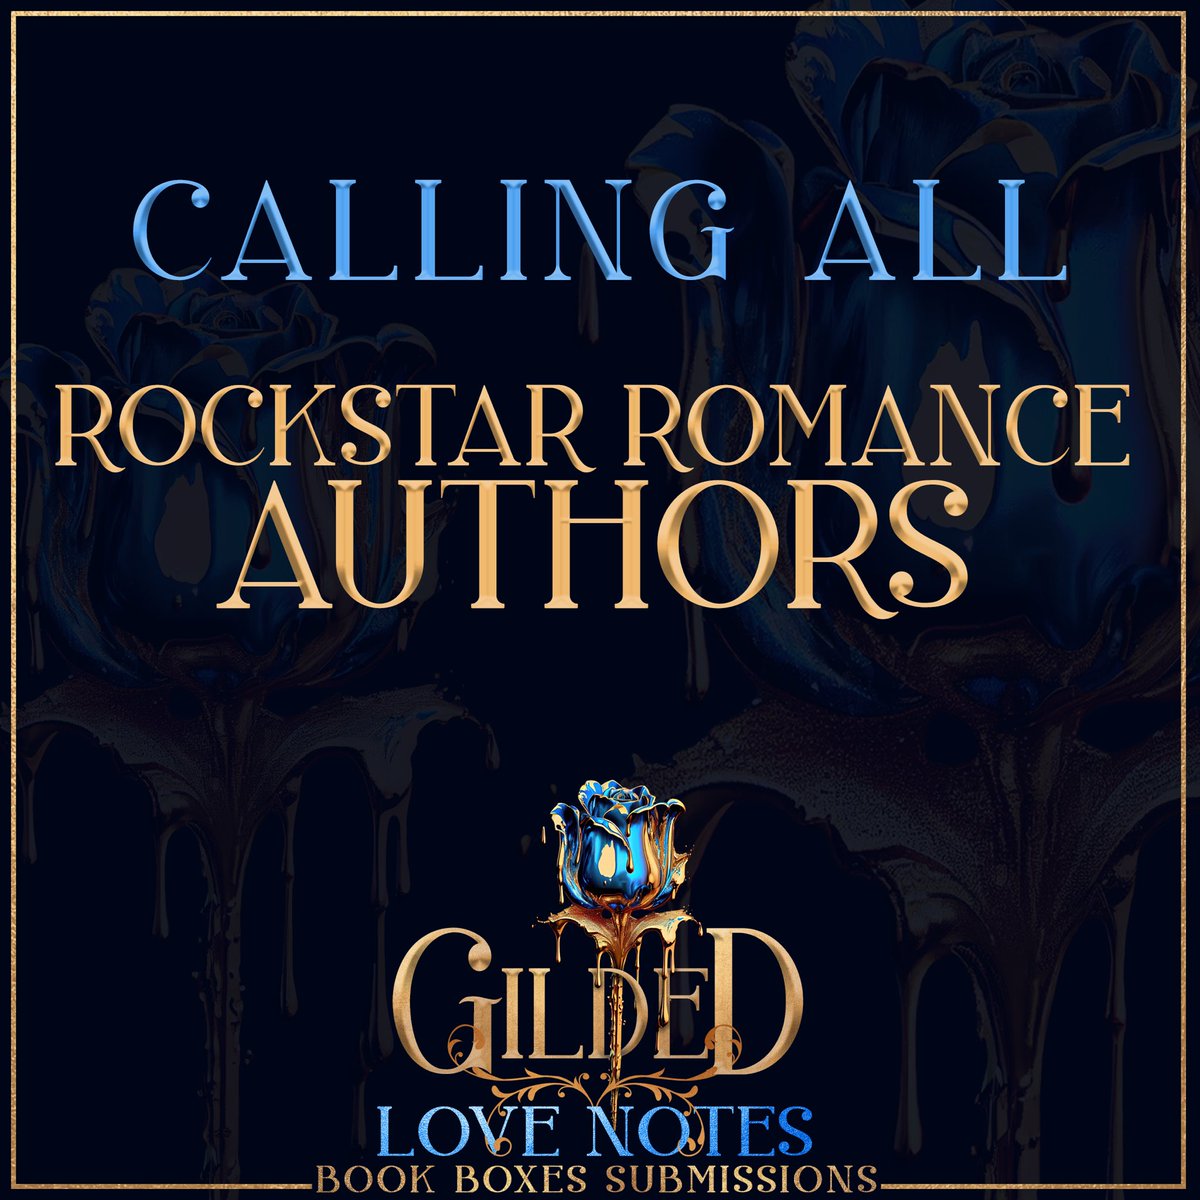 Authors submit your book now 
A few spots available 

🔗lnkbio.com/gildedlovenotes

#submission #authorscommunity #rockstarromance #bookcommunity  #booklovers #BookTwitter #bookbox